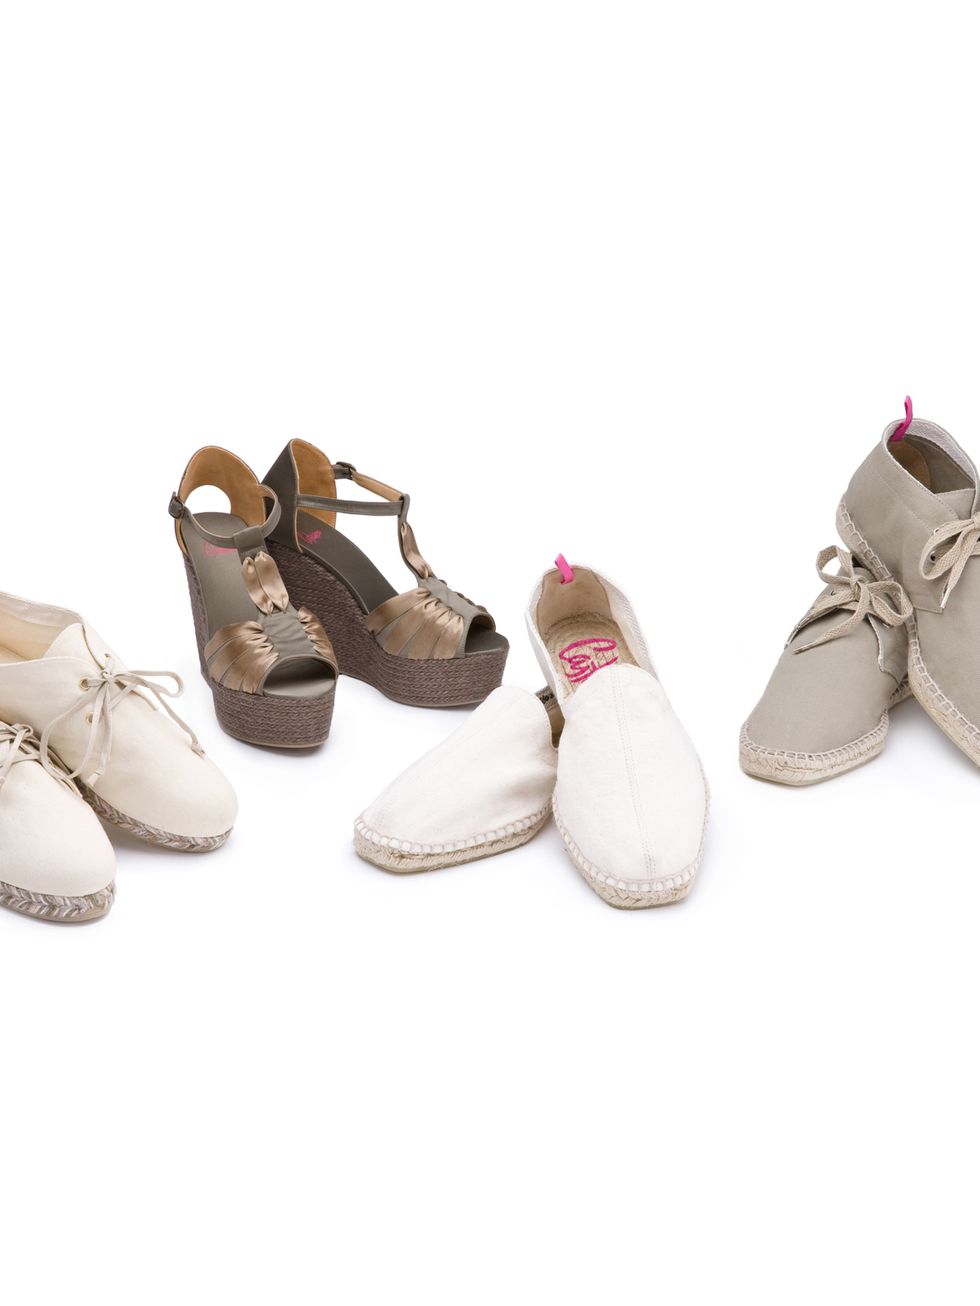 Footwear, Product, Brown, Tan, Fashion, Beige, Fawn, Natural material, Fashion design, Brand, 